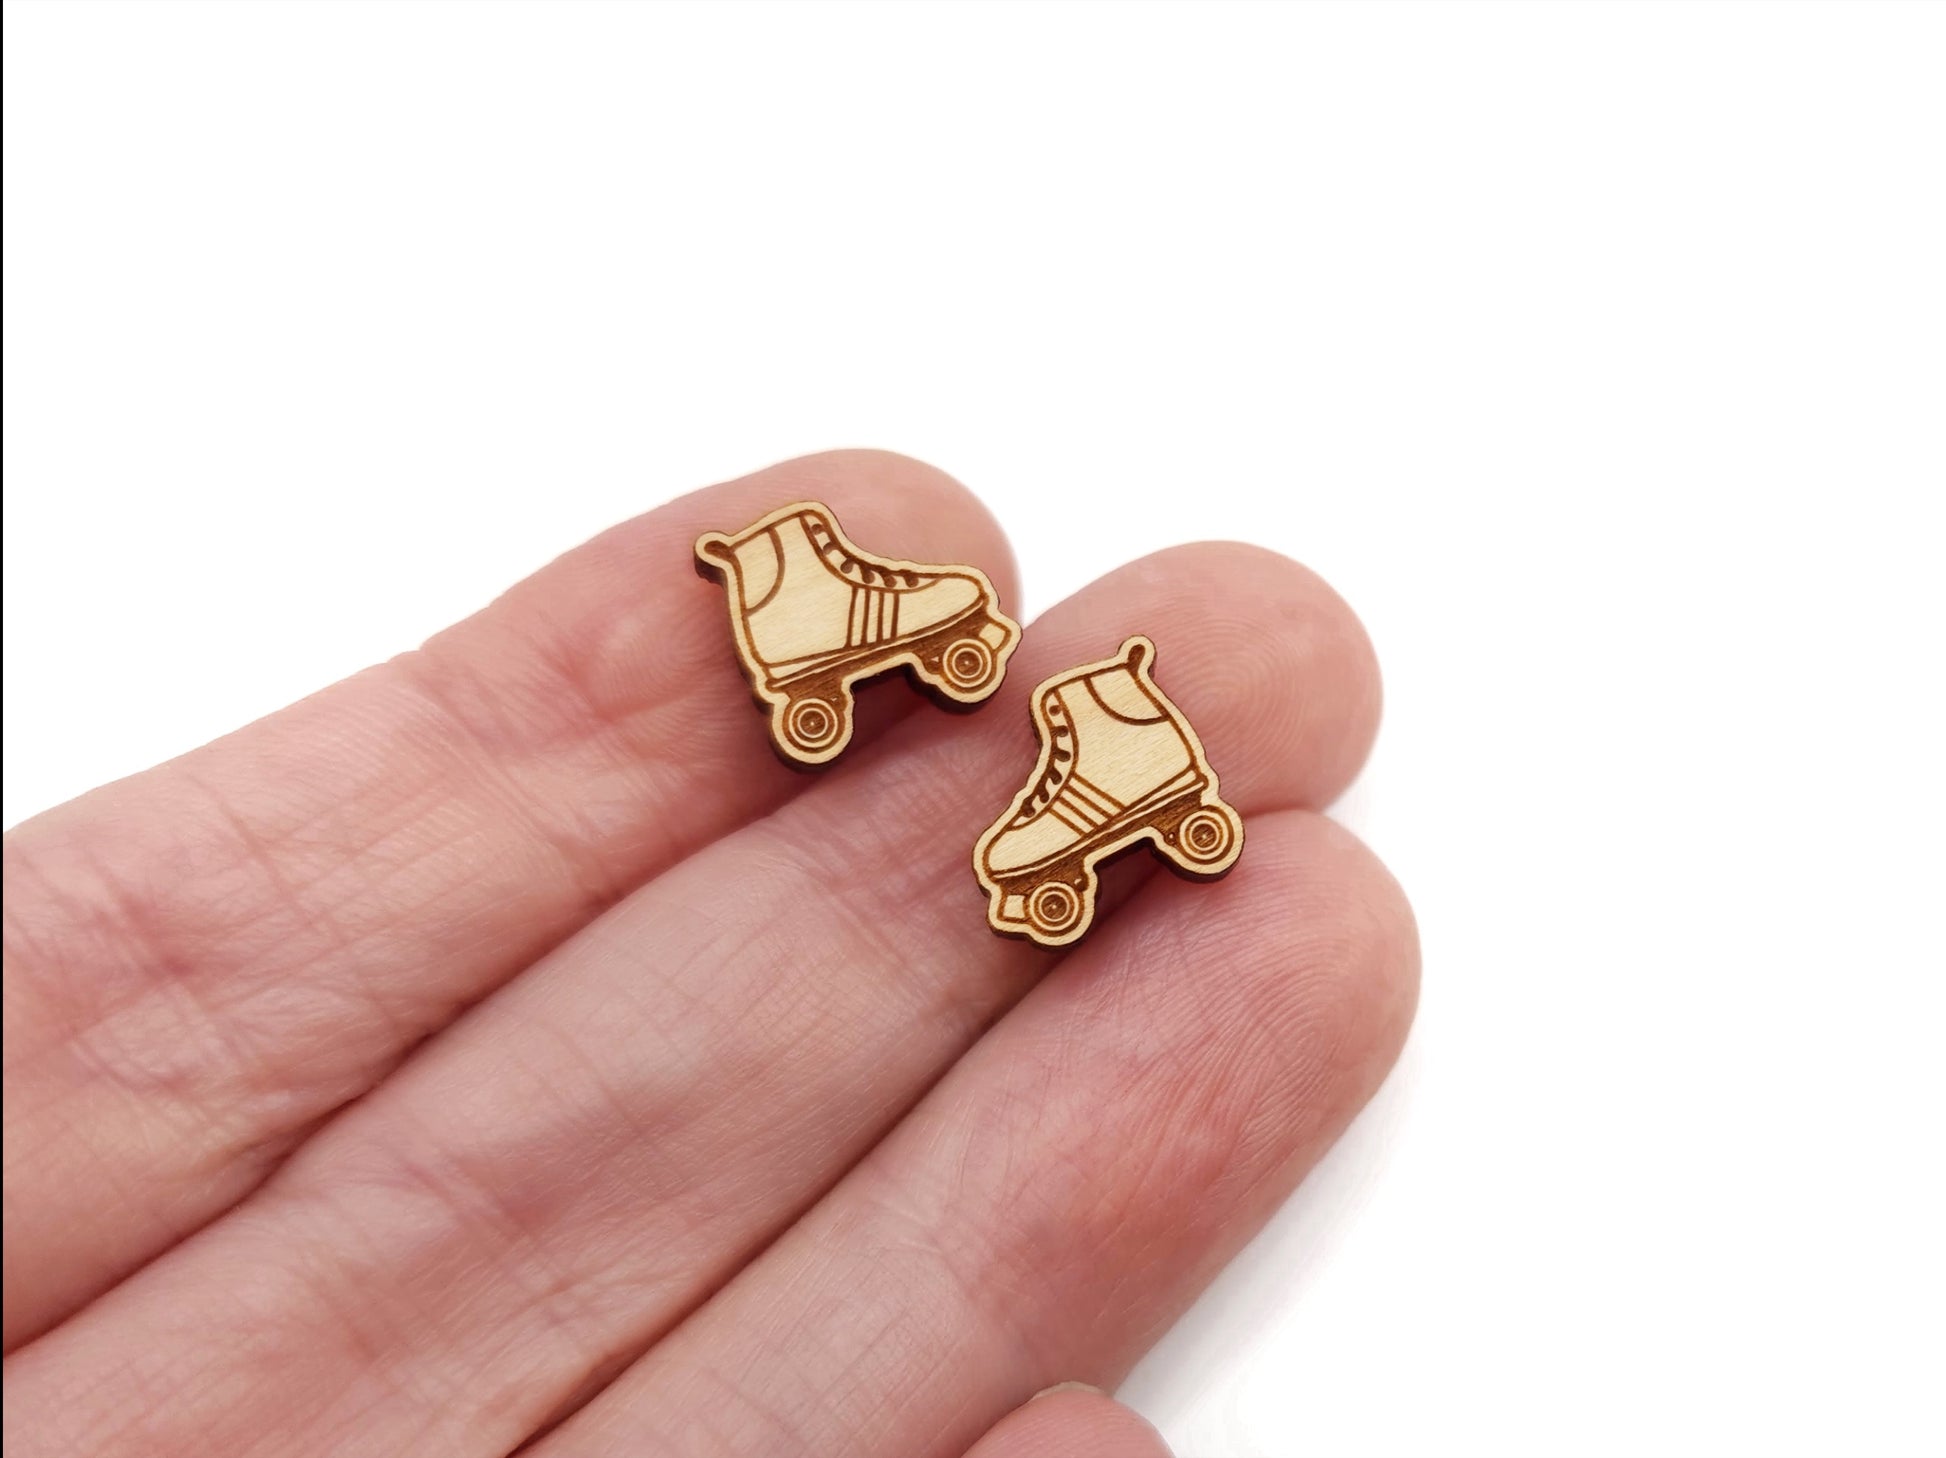 A hand holding a pair of wooden cabochon earring blanks cut and engraved to look like a roller skate